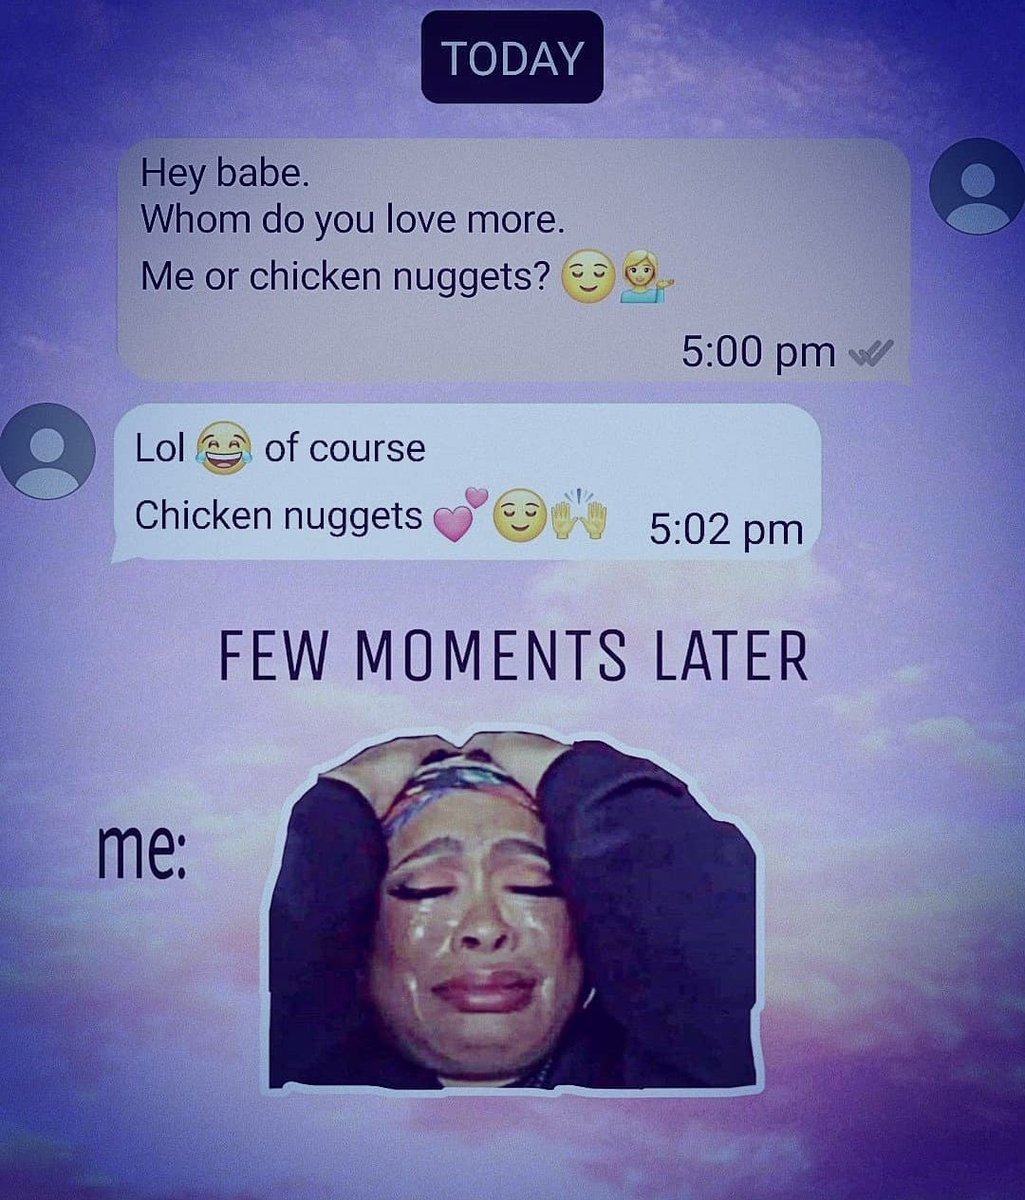 Ooff it's pretty hard to agree with this 😌😂. 
. 
. 
. 
. 
#meme #pain #chicken #chickennuggets #chats #babe #loveforchicken #truth #funny #editing #likes #comment #post #love #tweet